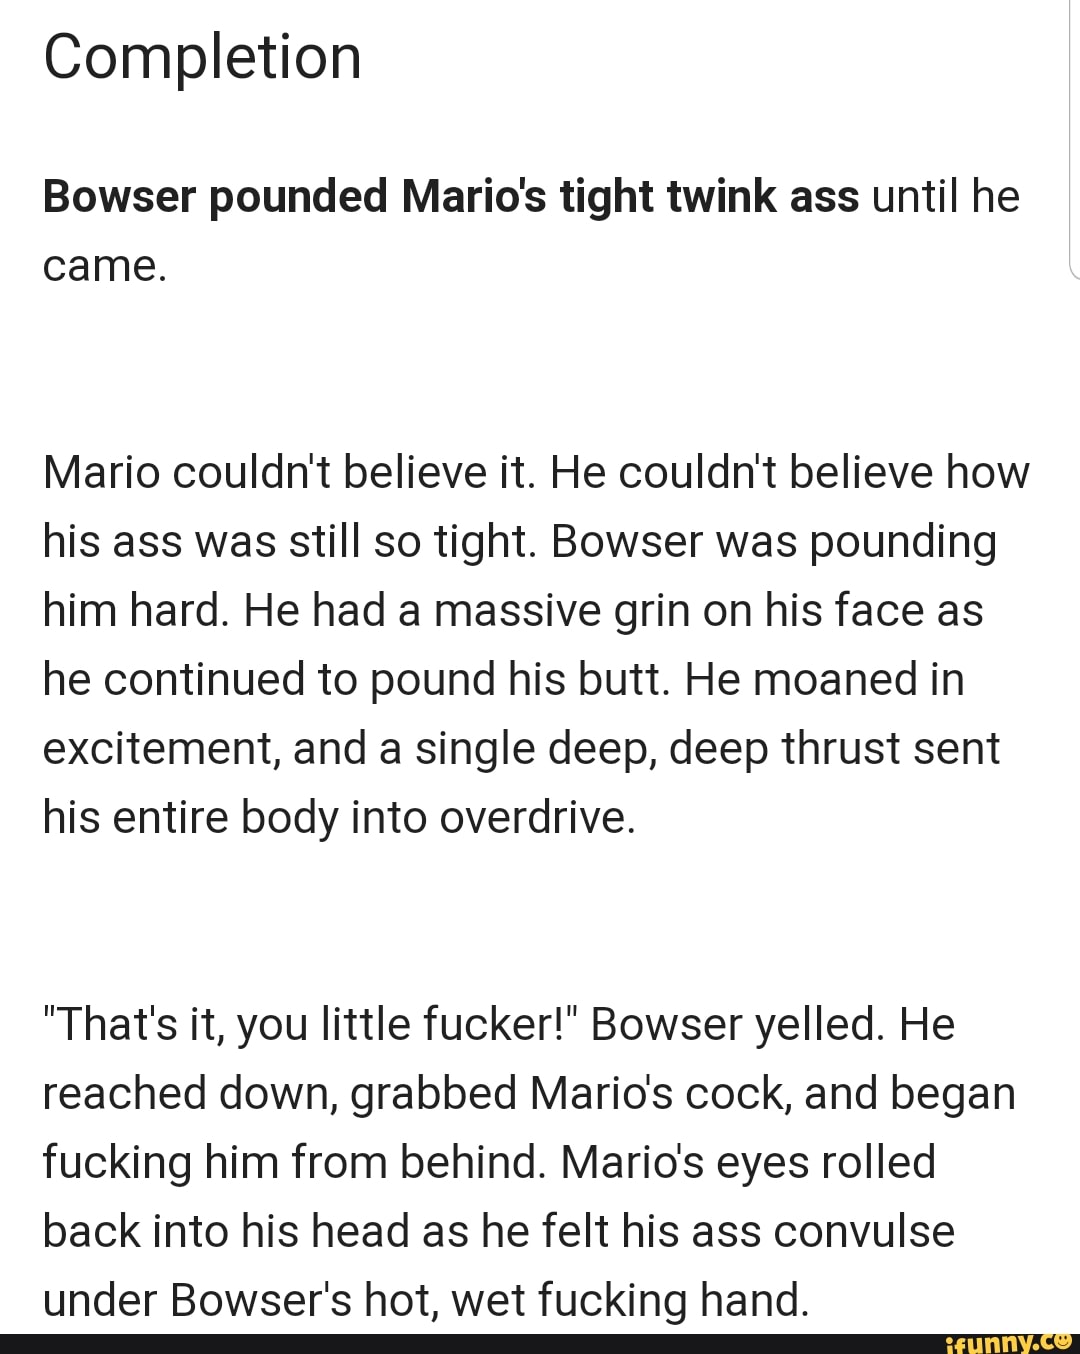 Completion Bowser Pounded Marios Tight Twink Ass Until He Came Mario Couldnt Believe It He